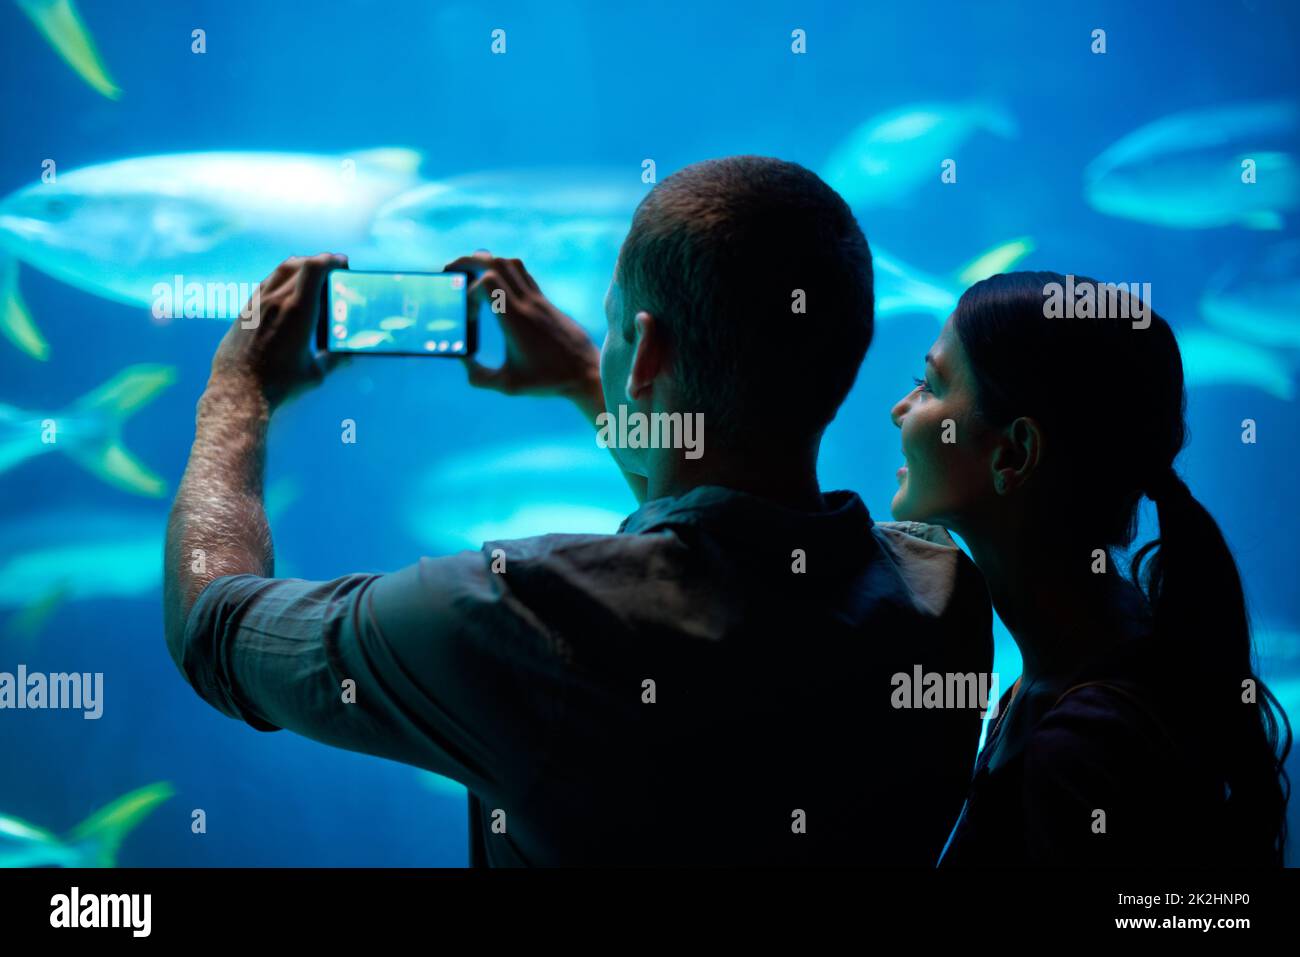 Sea-life snapshots. Shot of a young couple taking a snapshot of the fish in an aquarium. Stock Photo